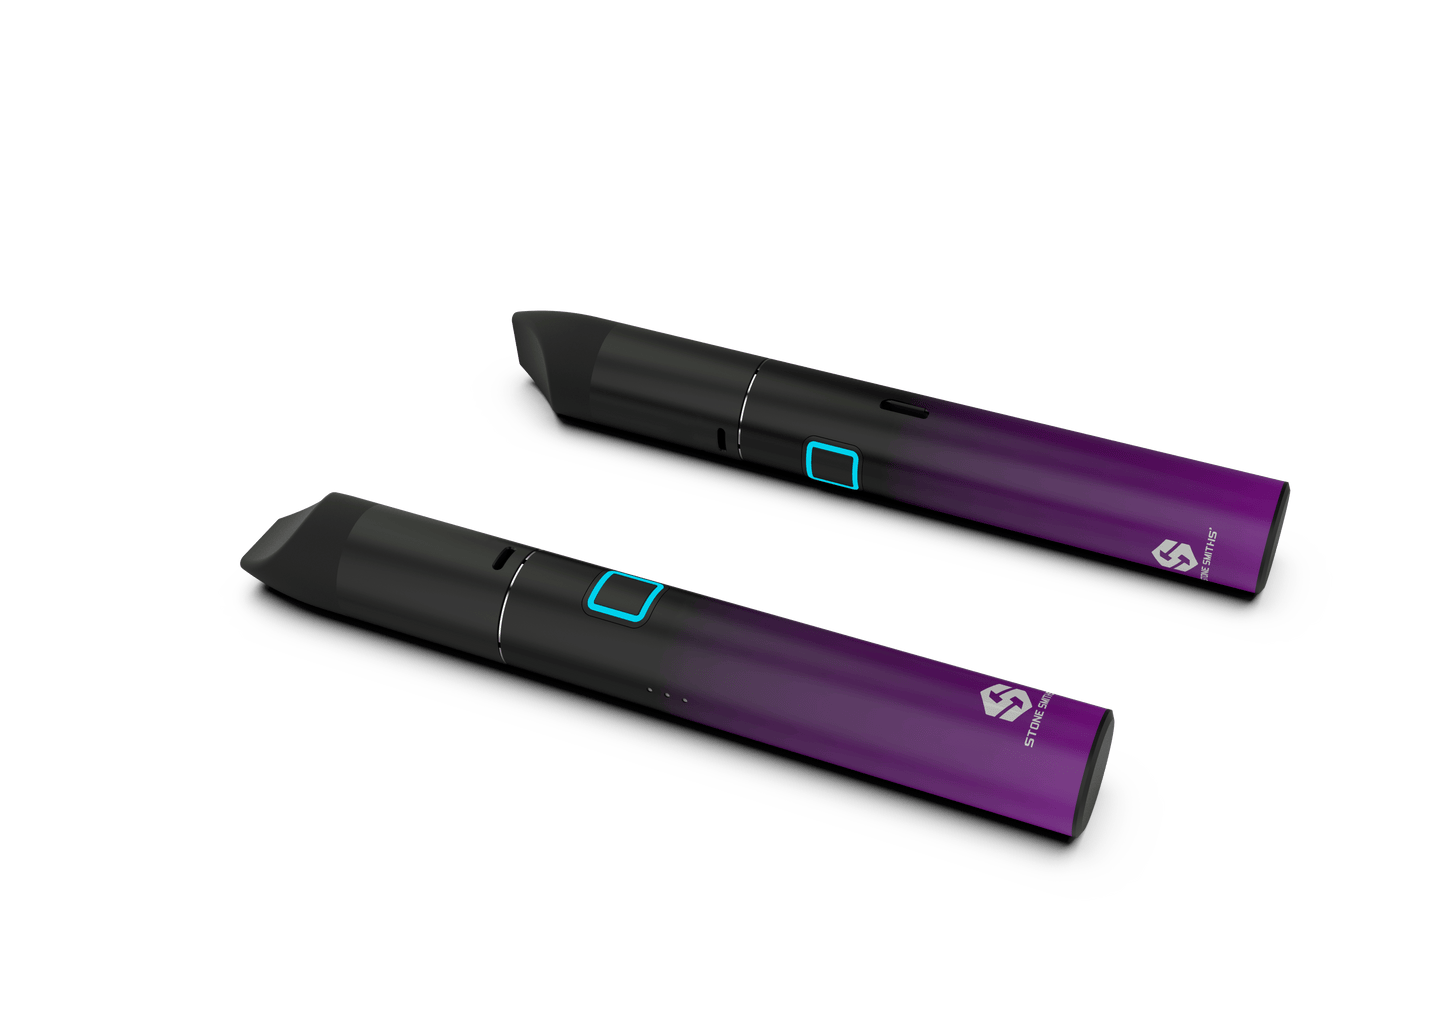 Stonesmiths' Device Amethyst - Purple Piccolo Concentrate Vape Pen (Shipping on Oct 20~25) Approx. 45.6 USD